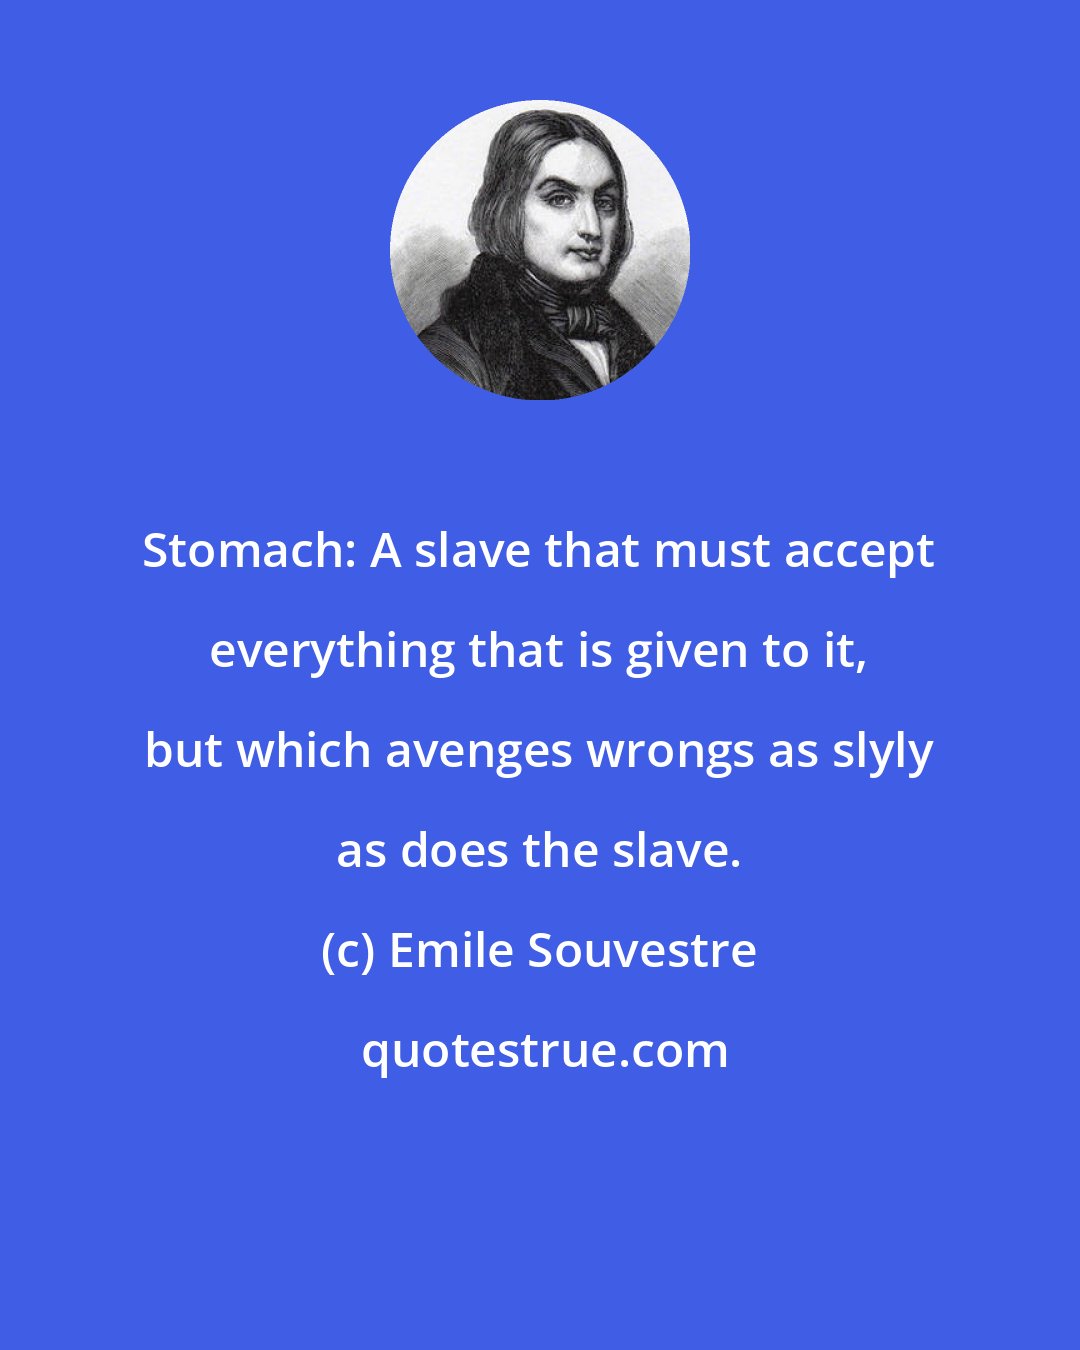 Emile Souvestre: Stomach: A slave that must accept everything that is given to it, but which avenges wrongs as slyly as does the slave.